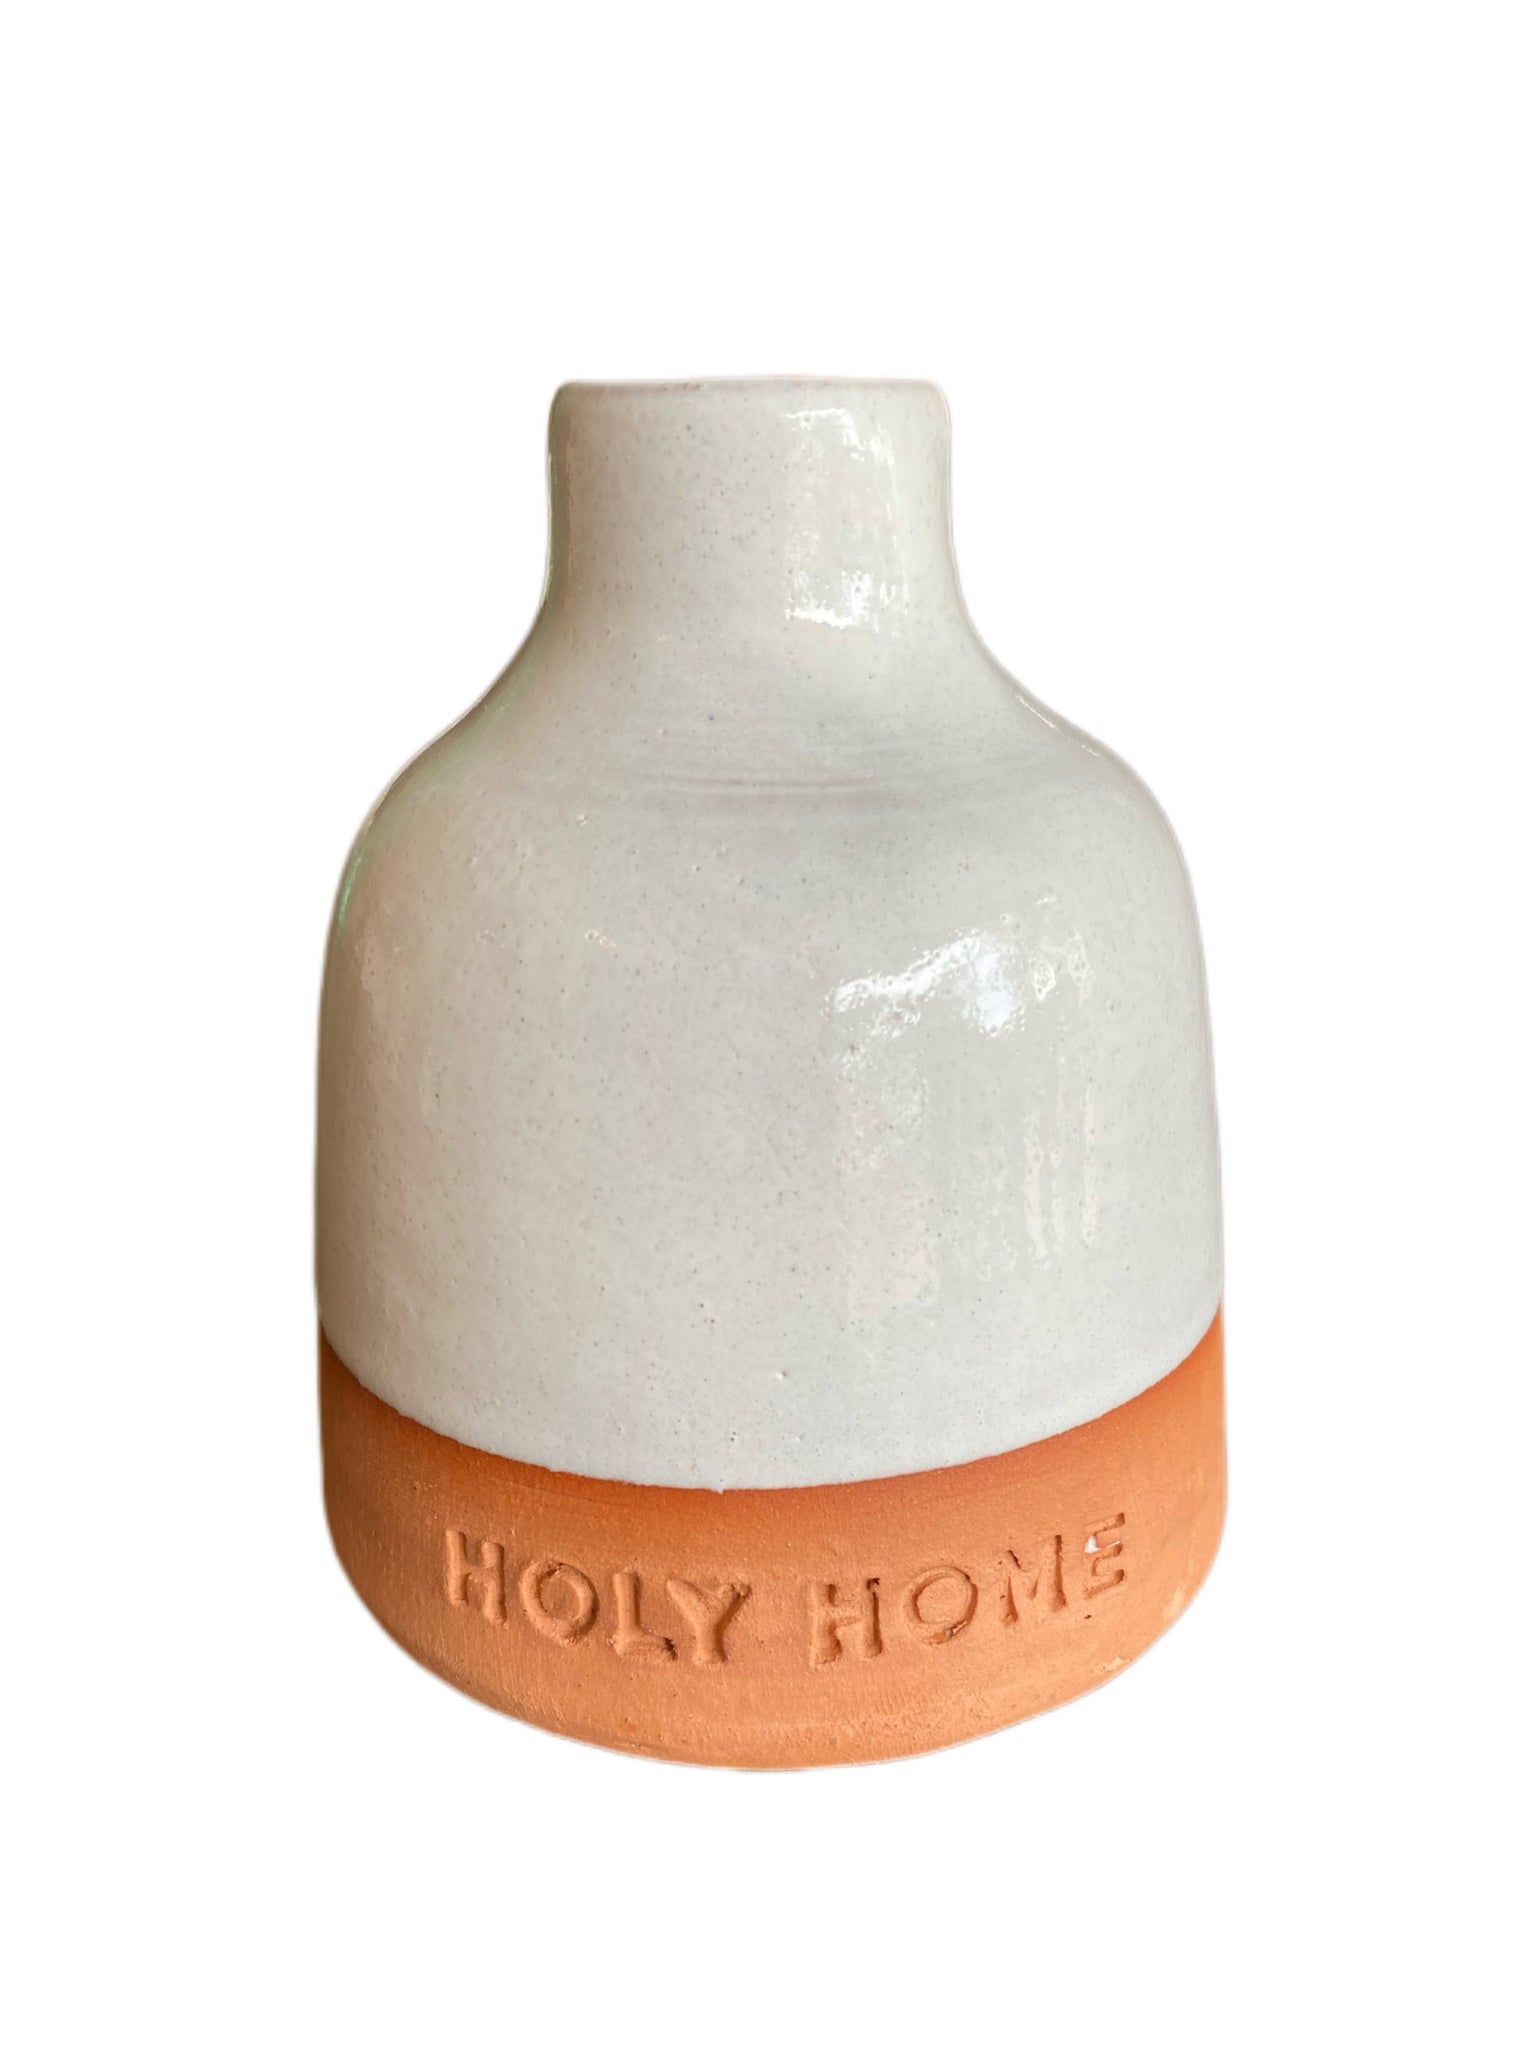 CERAMIC DIFFUSER FOR HOLY HOME FRESHENERS